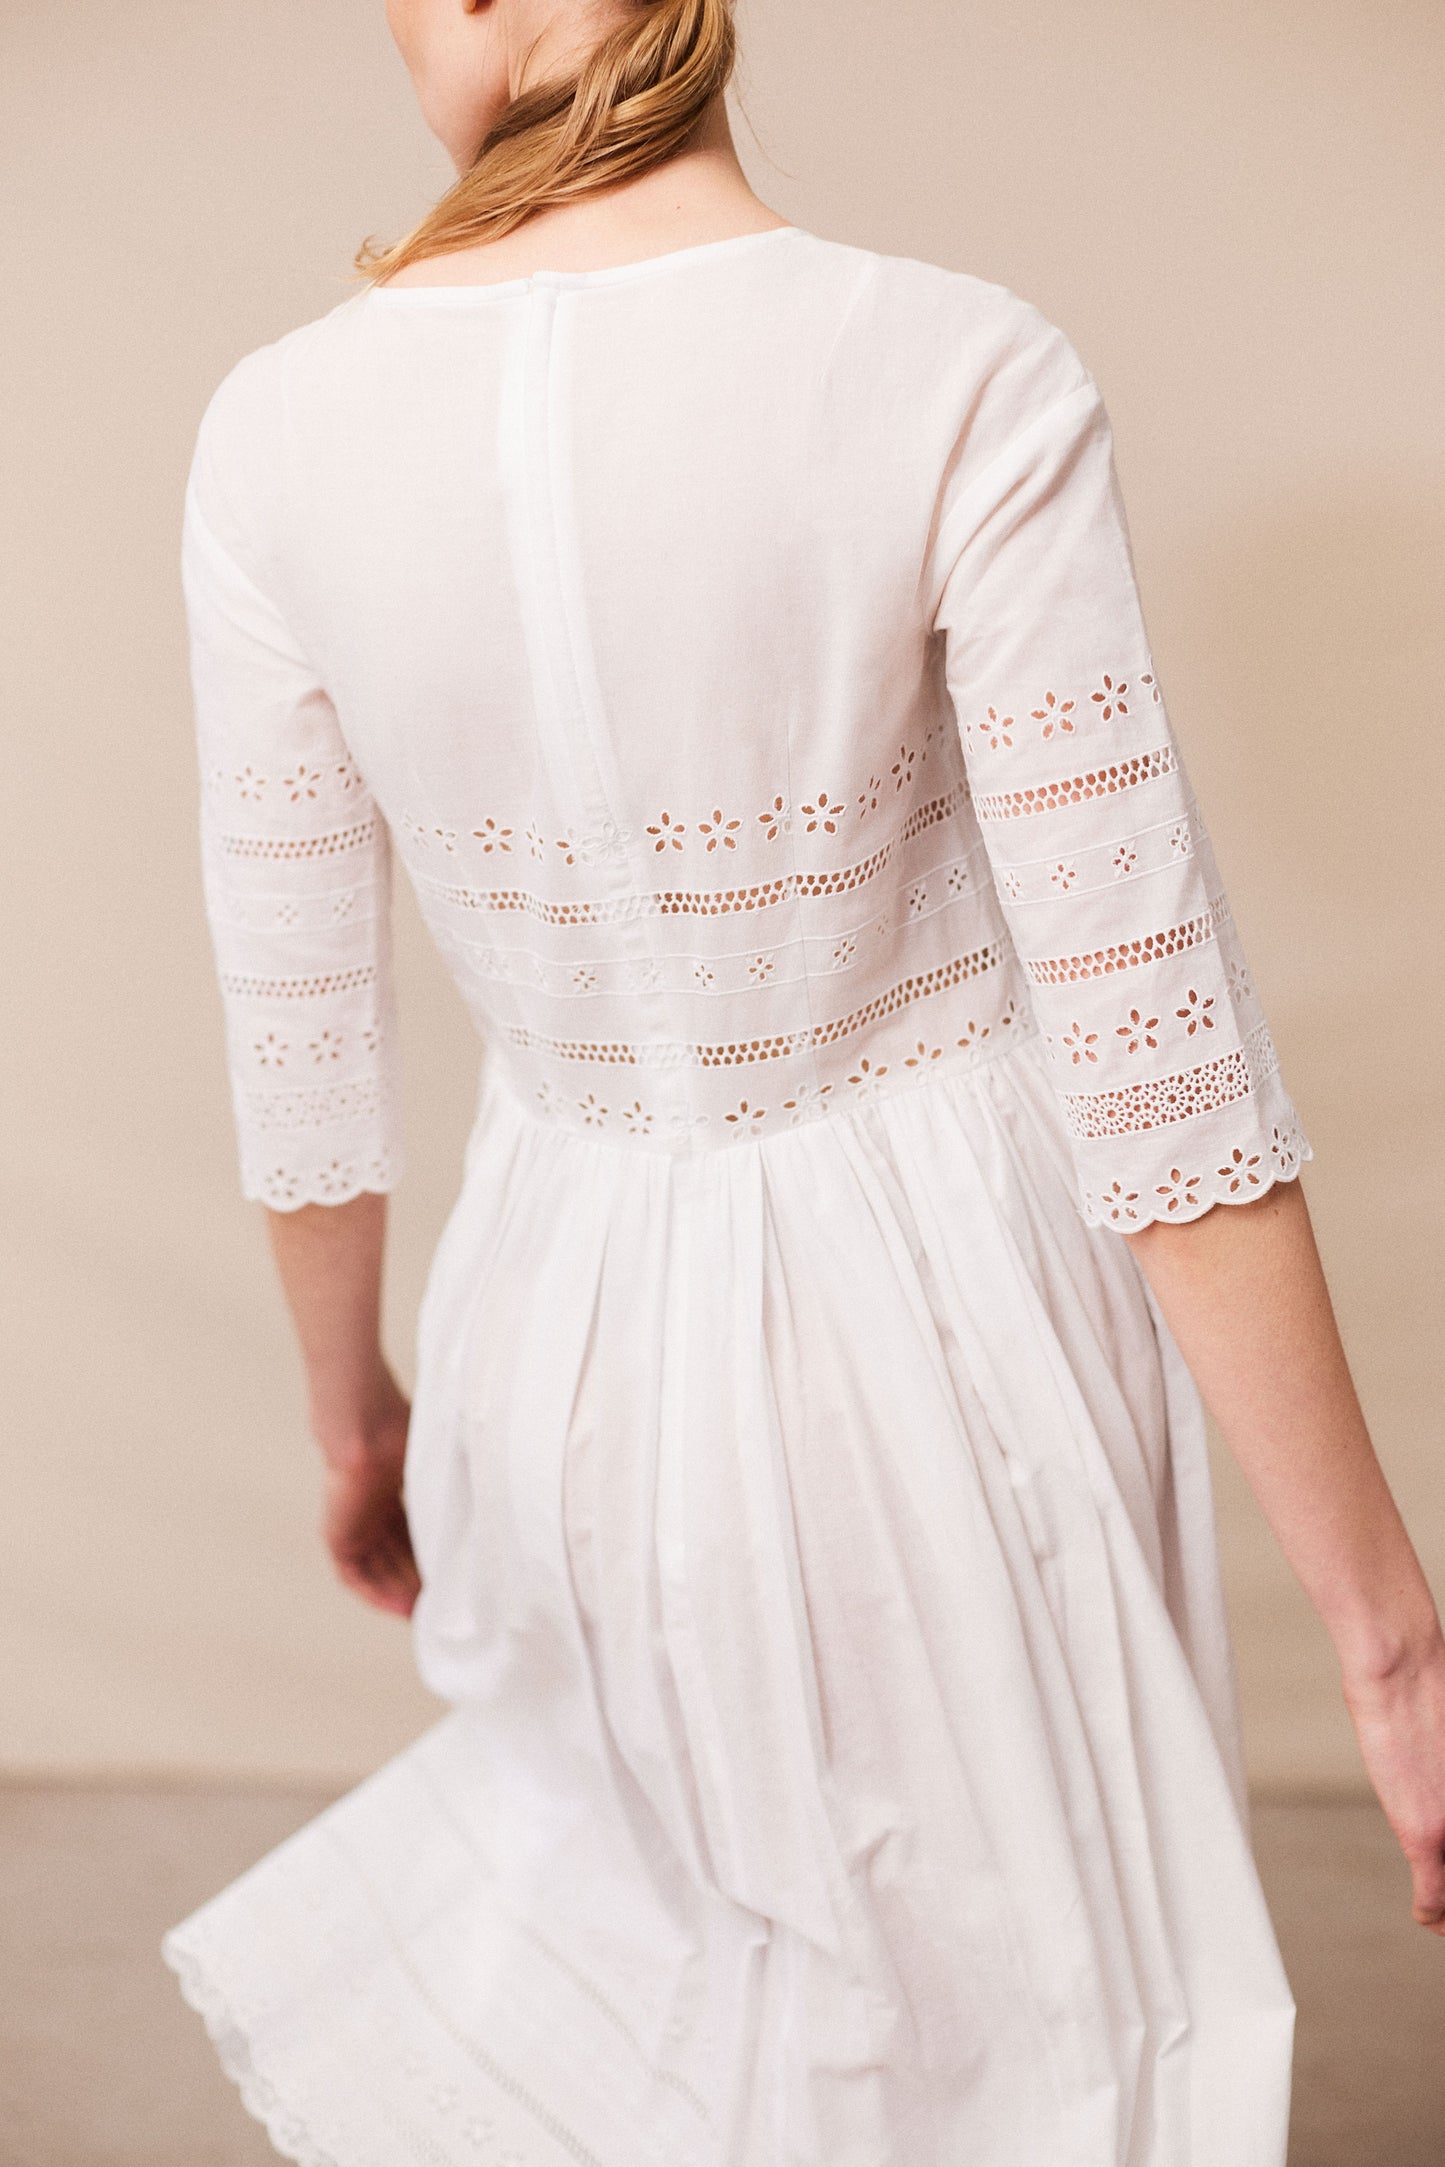 EMBROIDERED WHITE DRESS